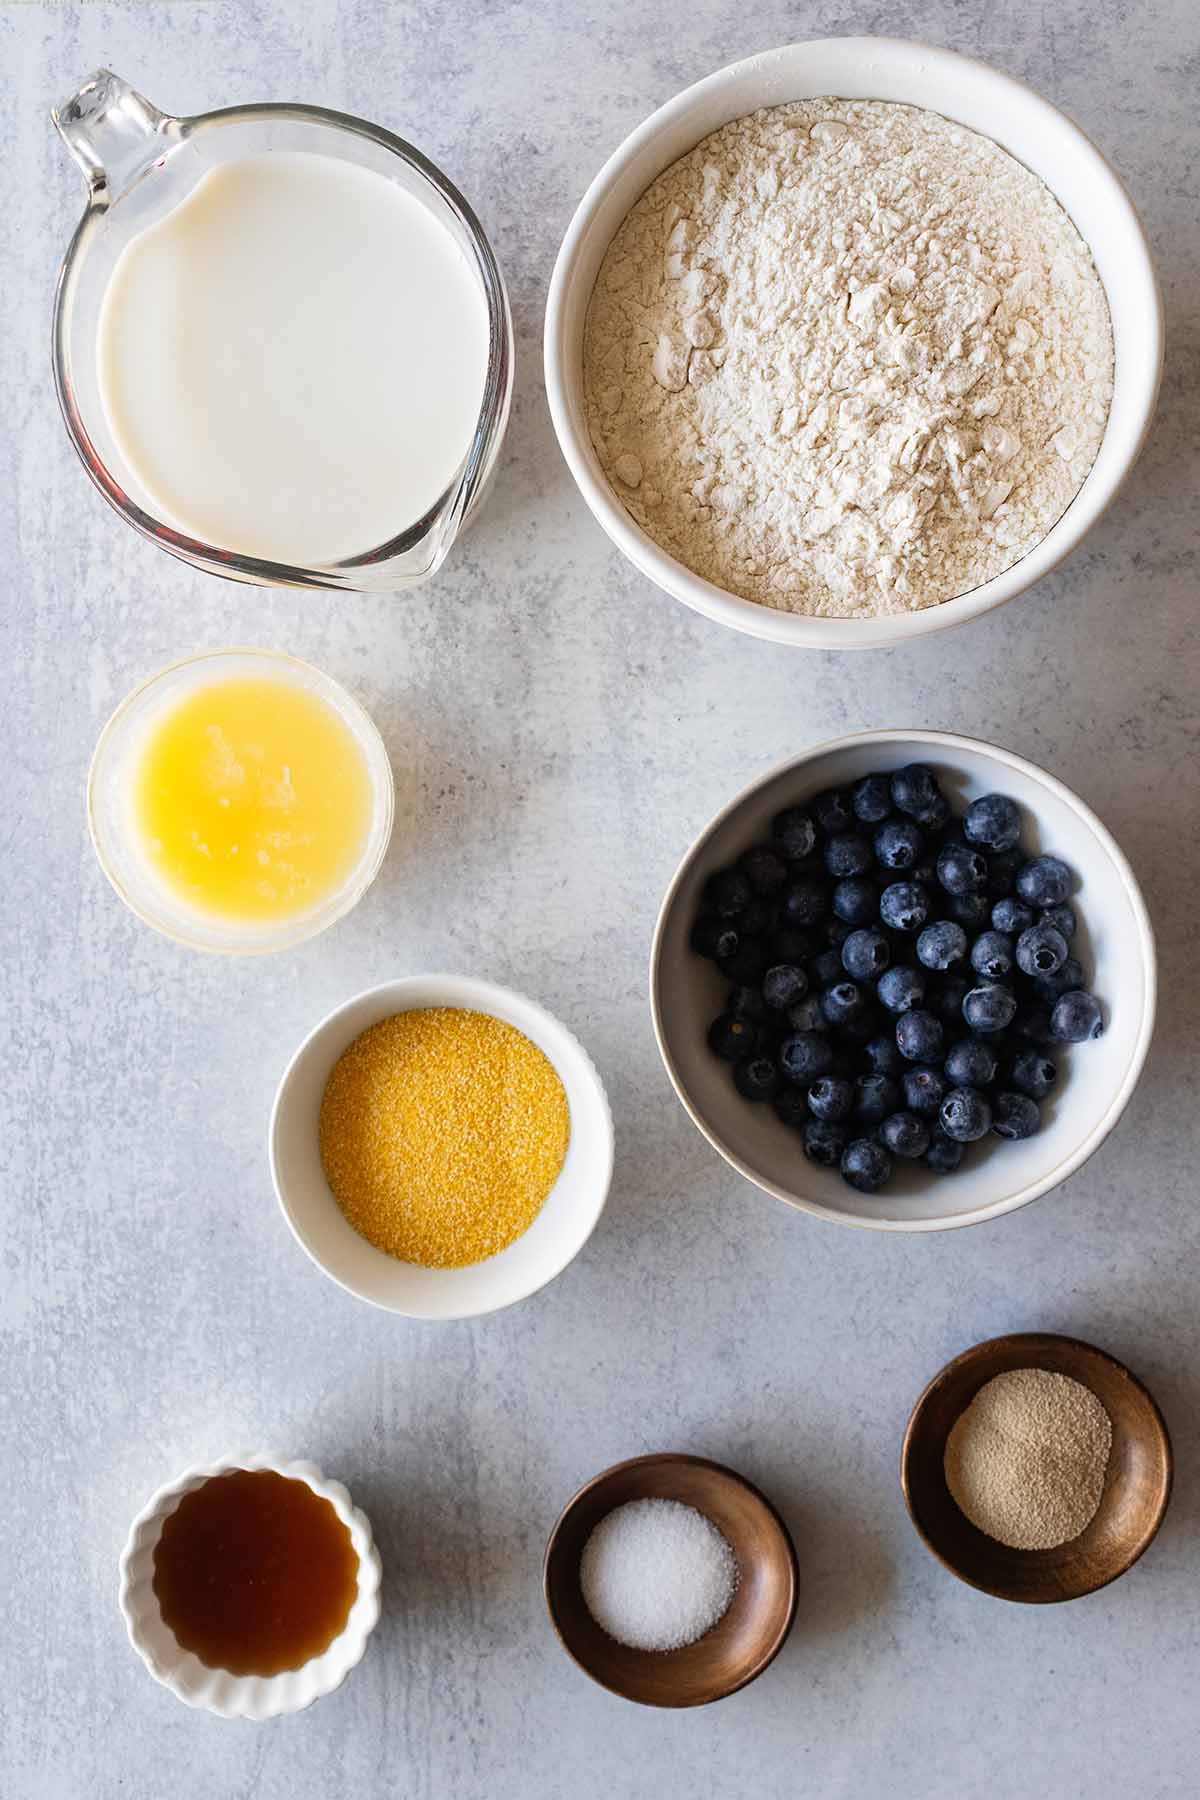 Blueberry English muffin ingredients